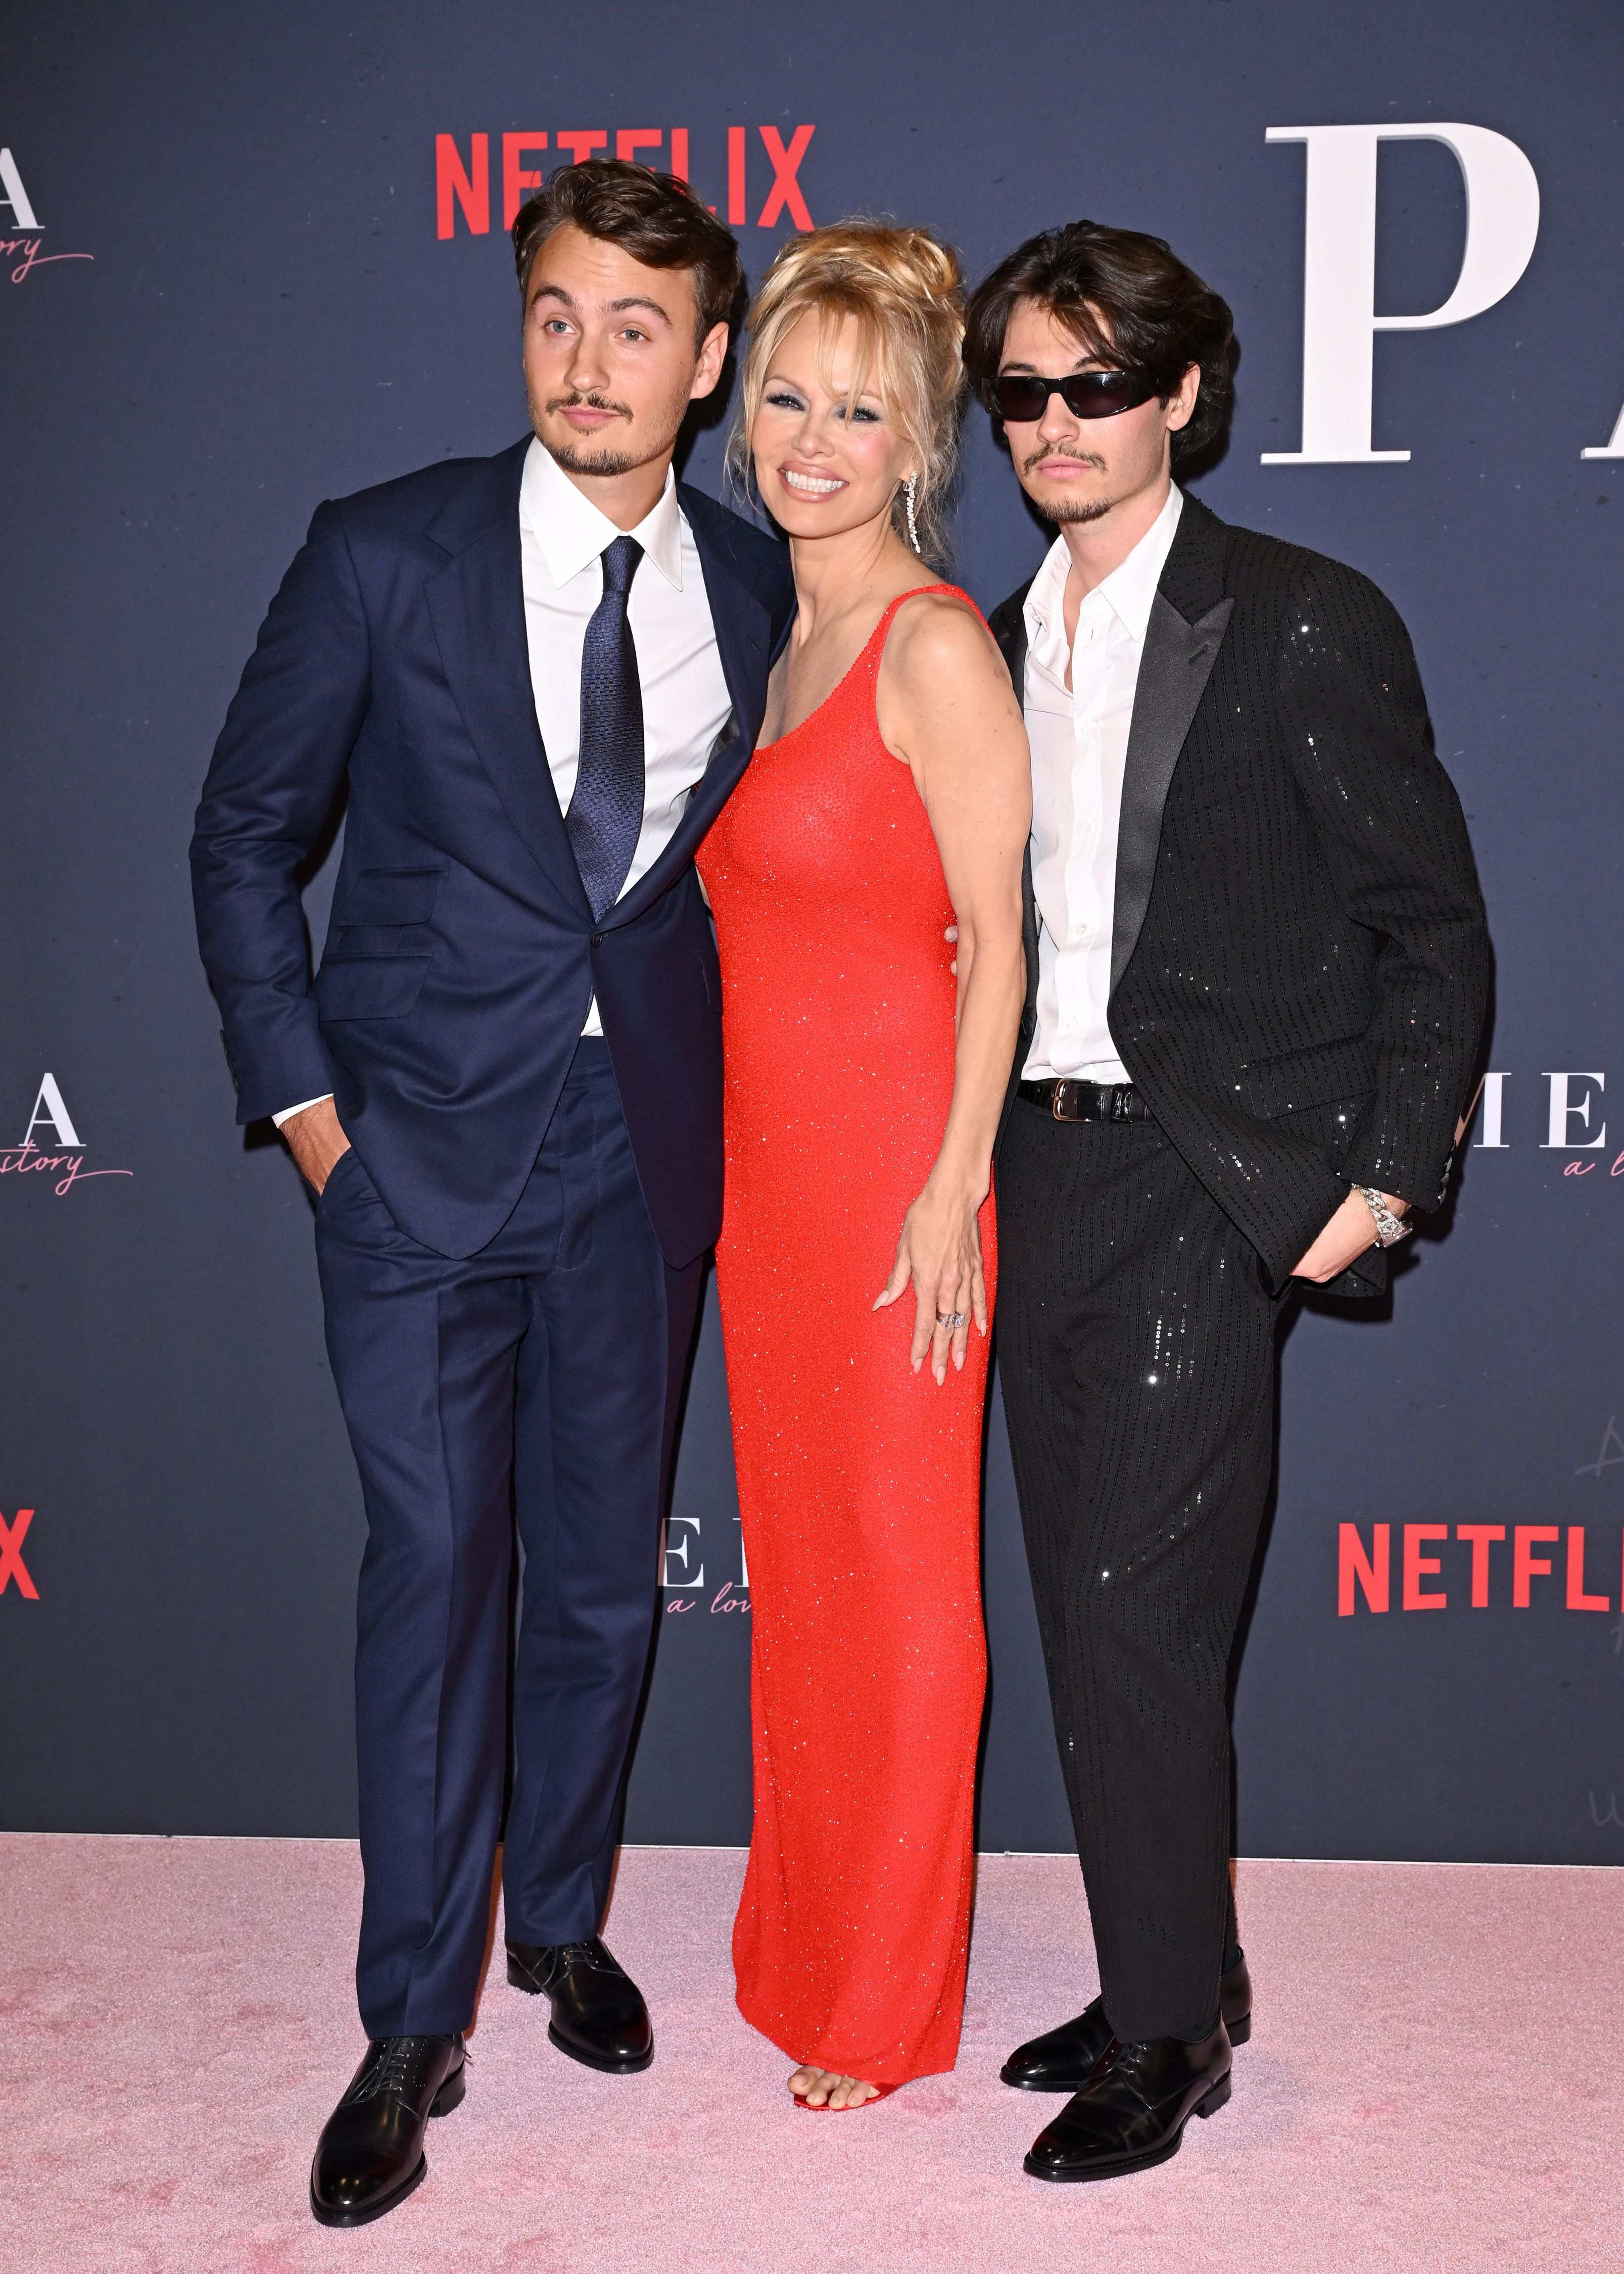 Pamela smiles on the red carpet with her adult sons flanking her